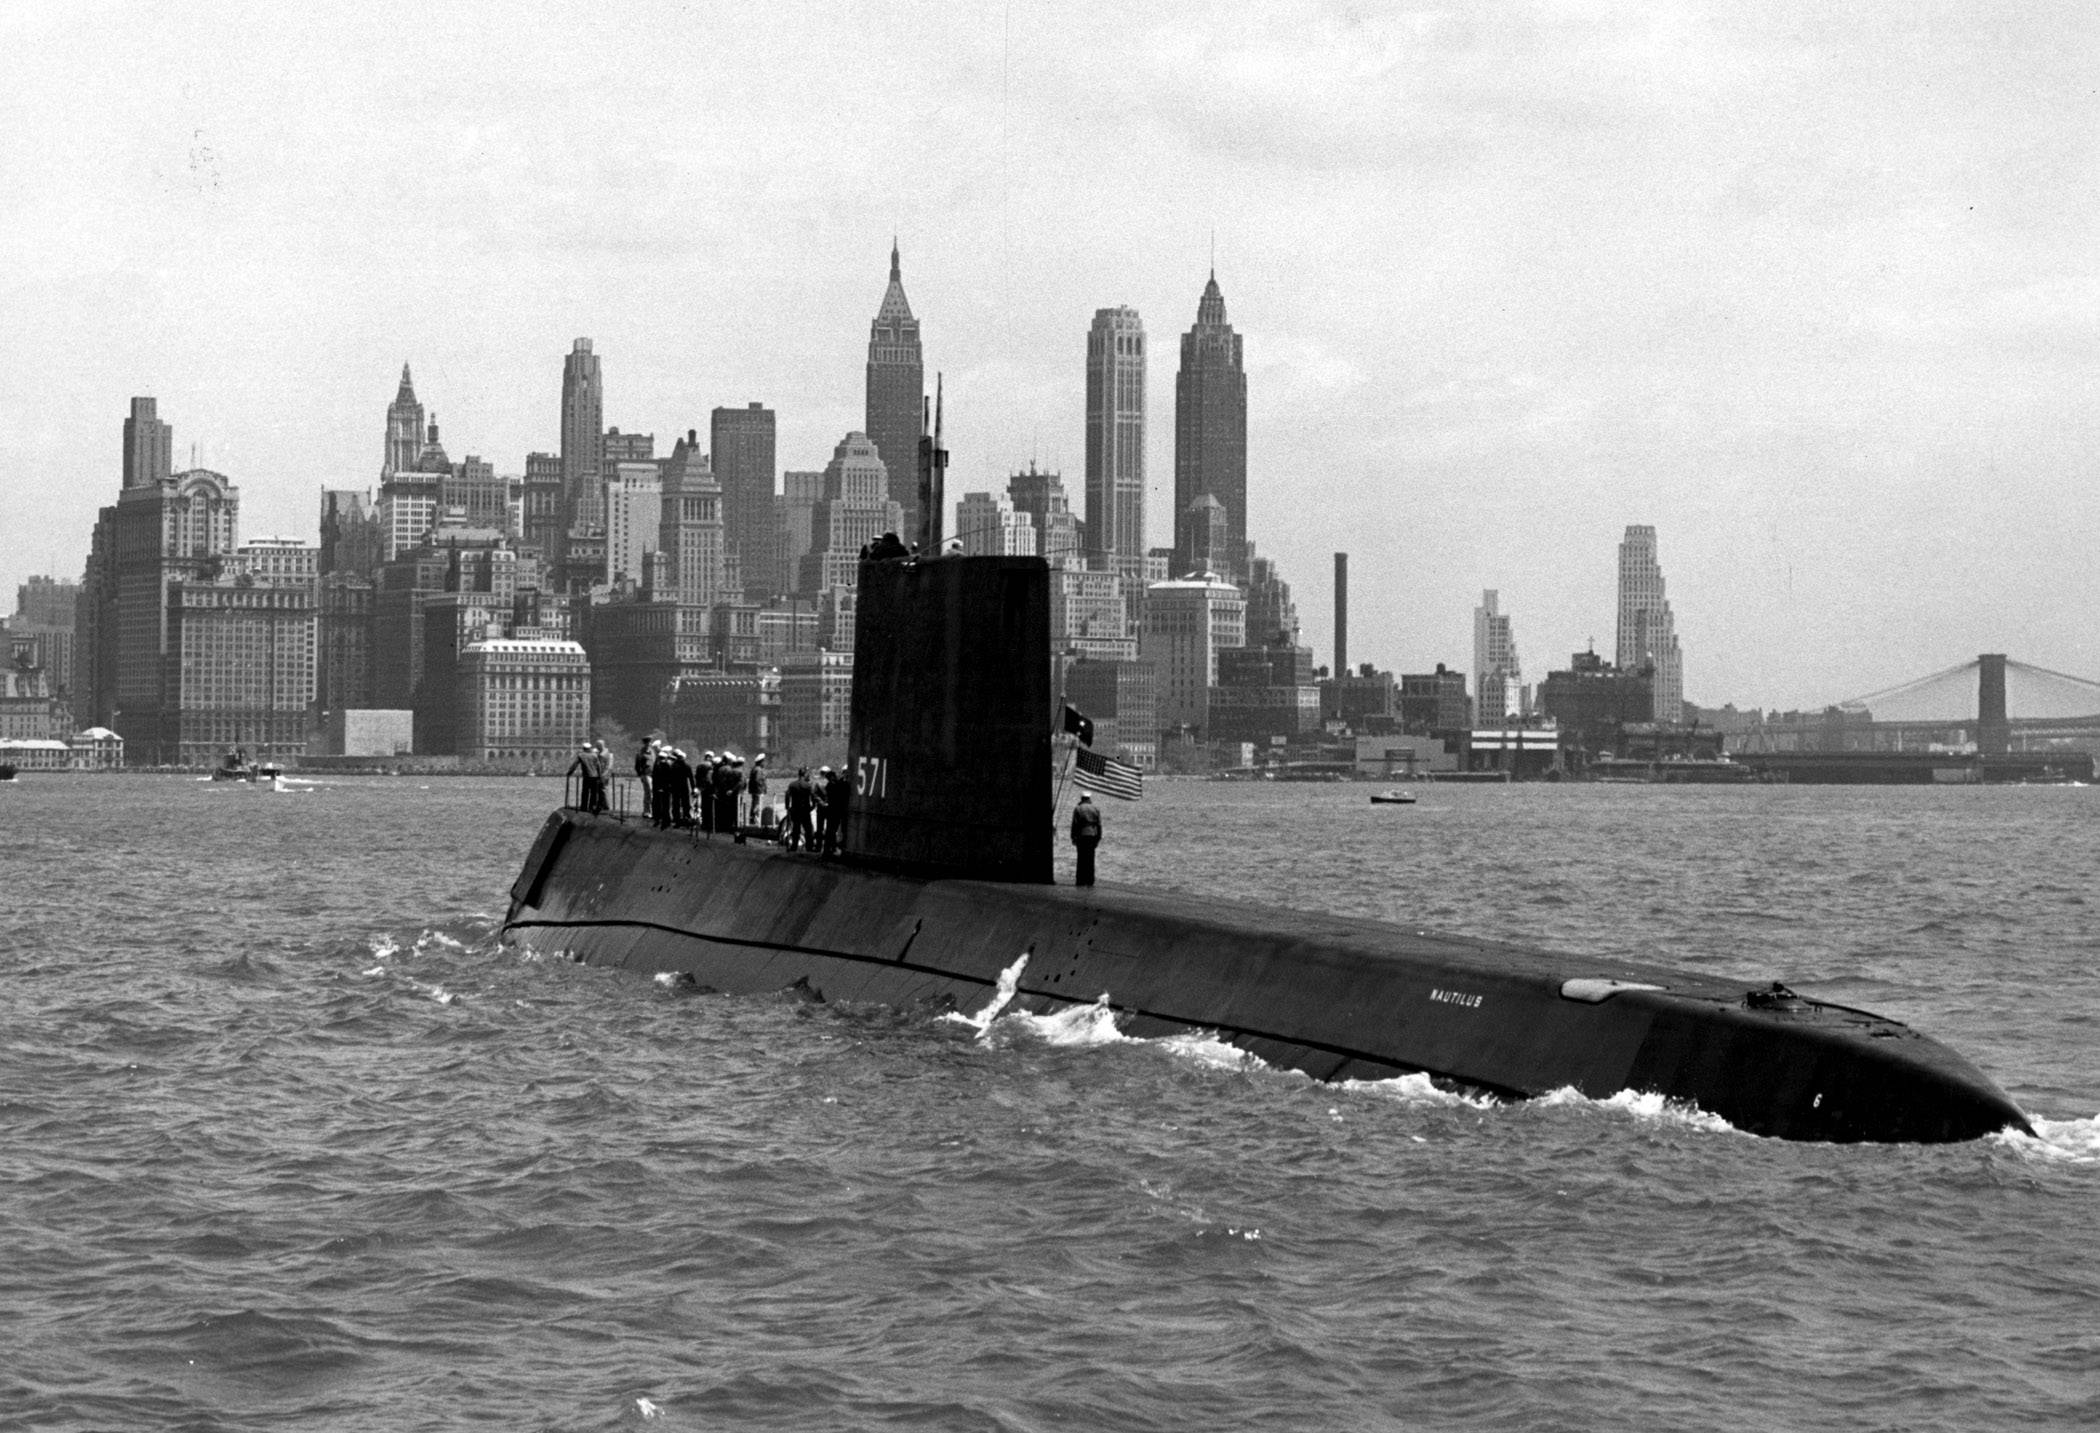 January 21, 1954 – The USS Nautilus, the First Nuclear-Powered Submarine, is Launched